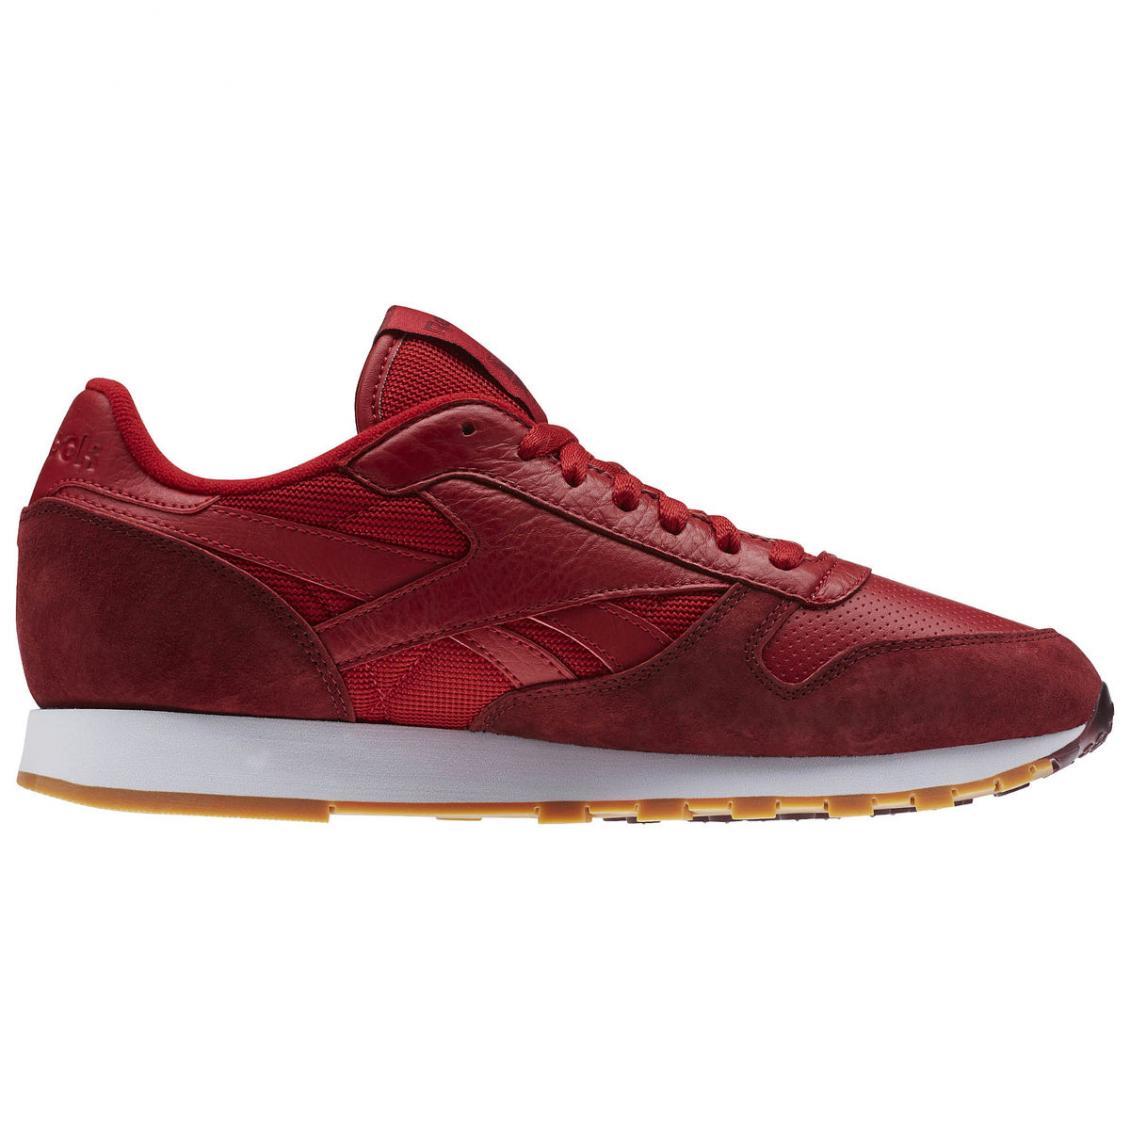 Red – Reebok Classic Leather Perfect Split Pack Mens Flash Red / Merlot / White / Gum